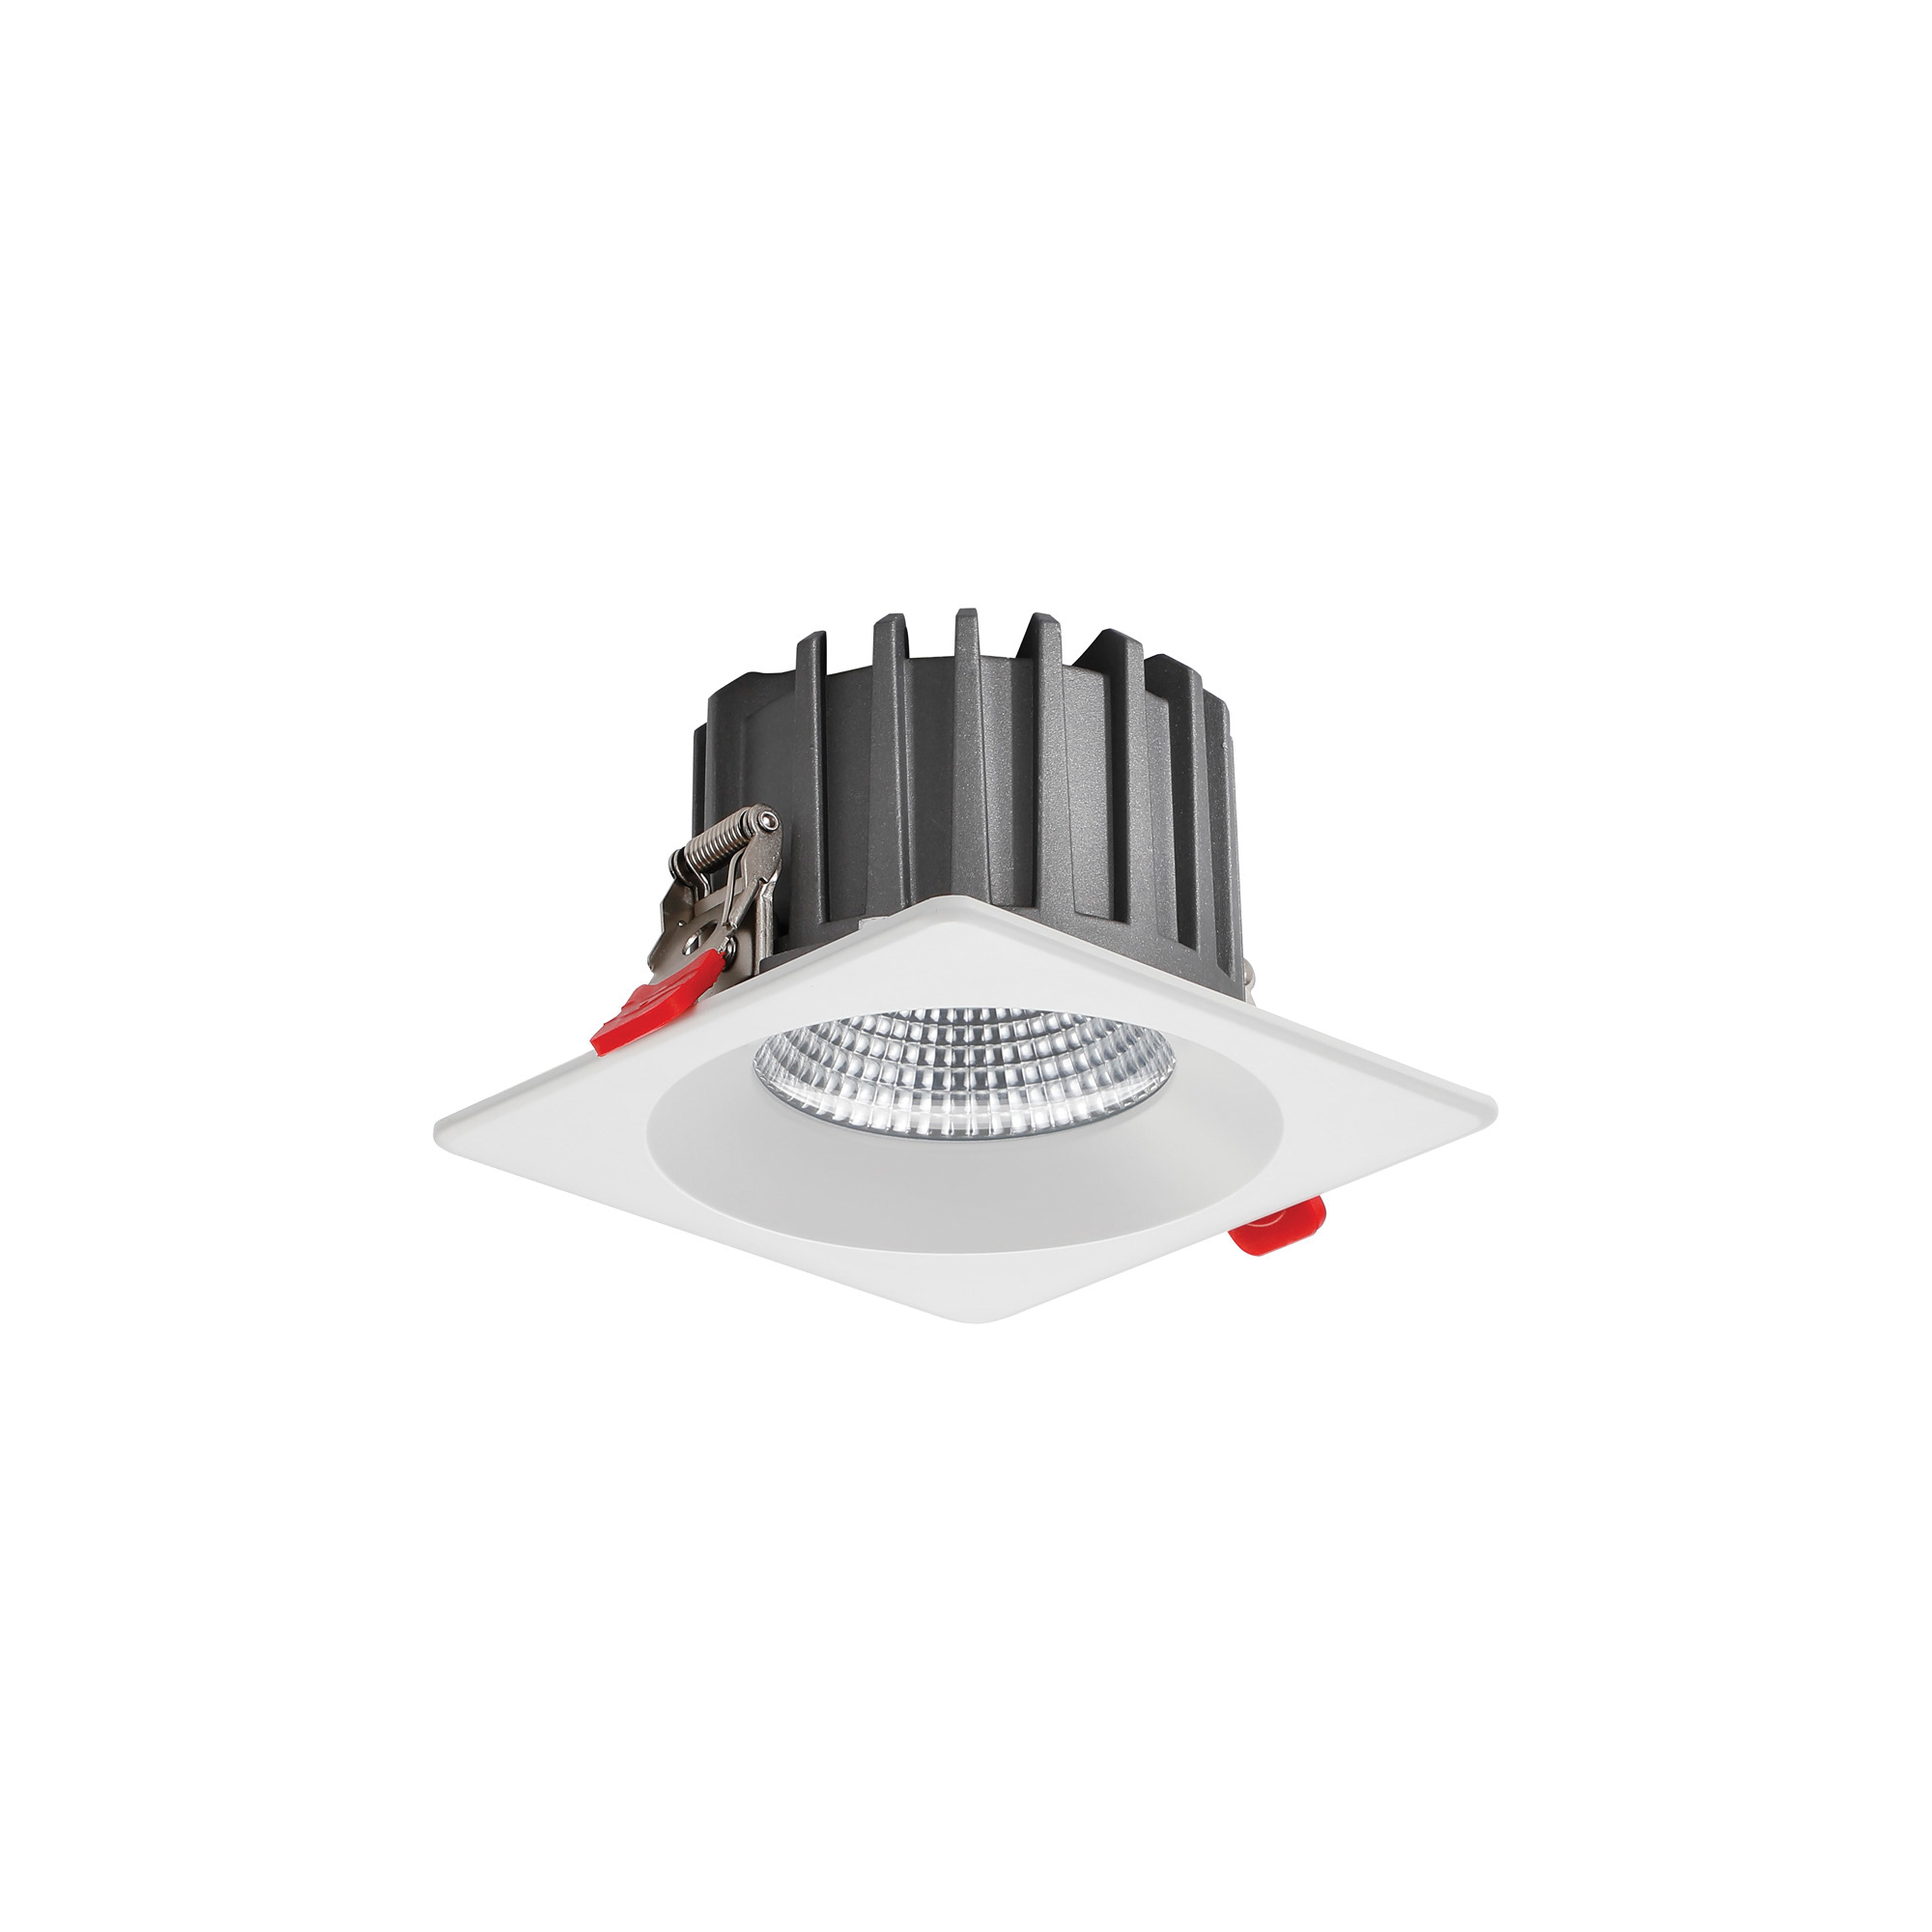 DL200070  Bionic 15; 15W; 350mA; White Deep Square Recessed Downlight; 1104lm ;Cut Out 120mm; 40° ; 3000K; IP44; DRIVER INC.; 5yrs Warranty.